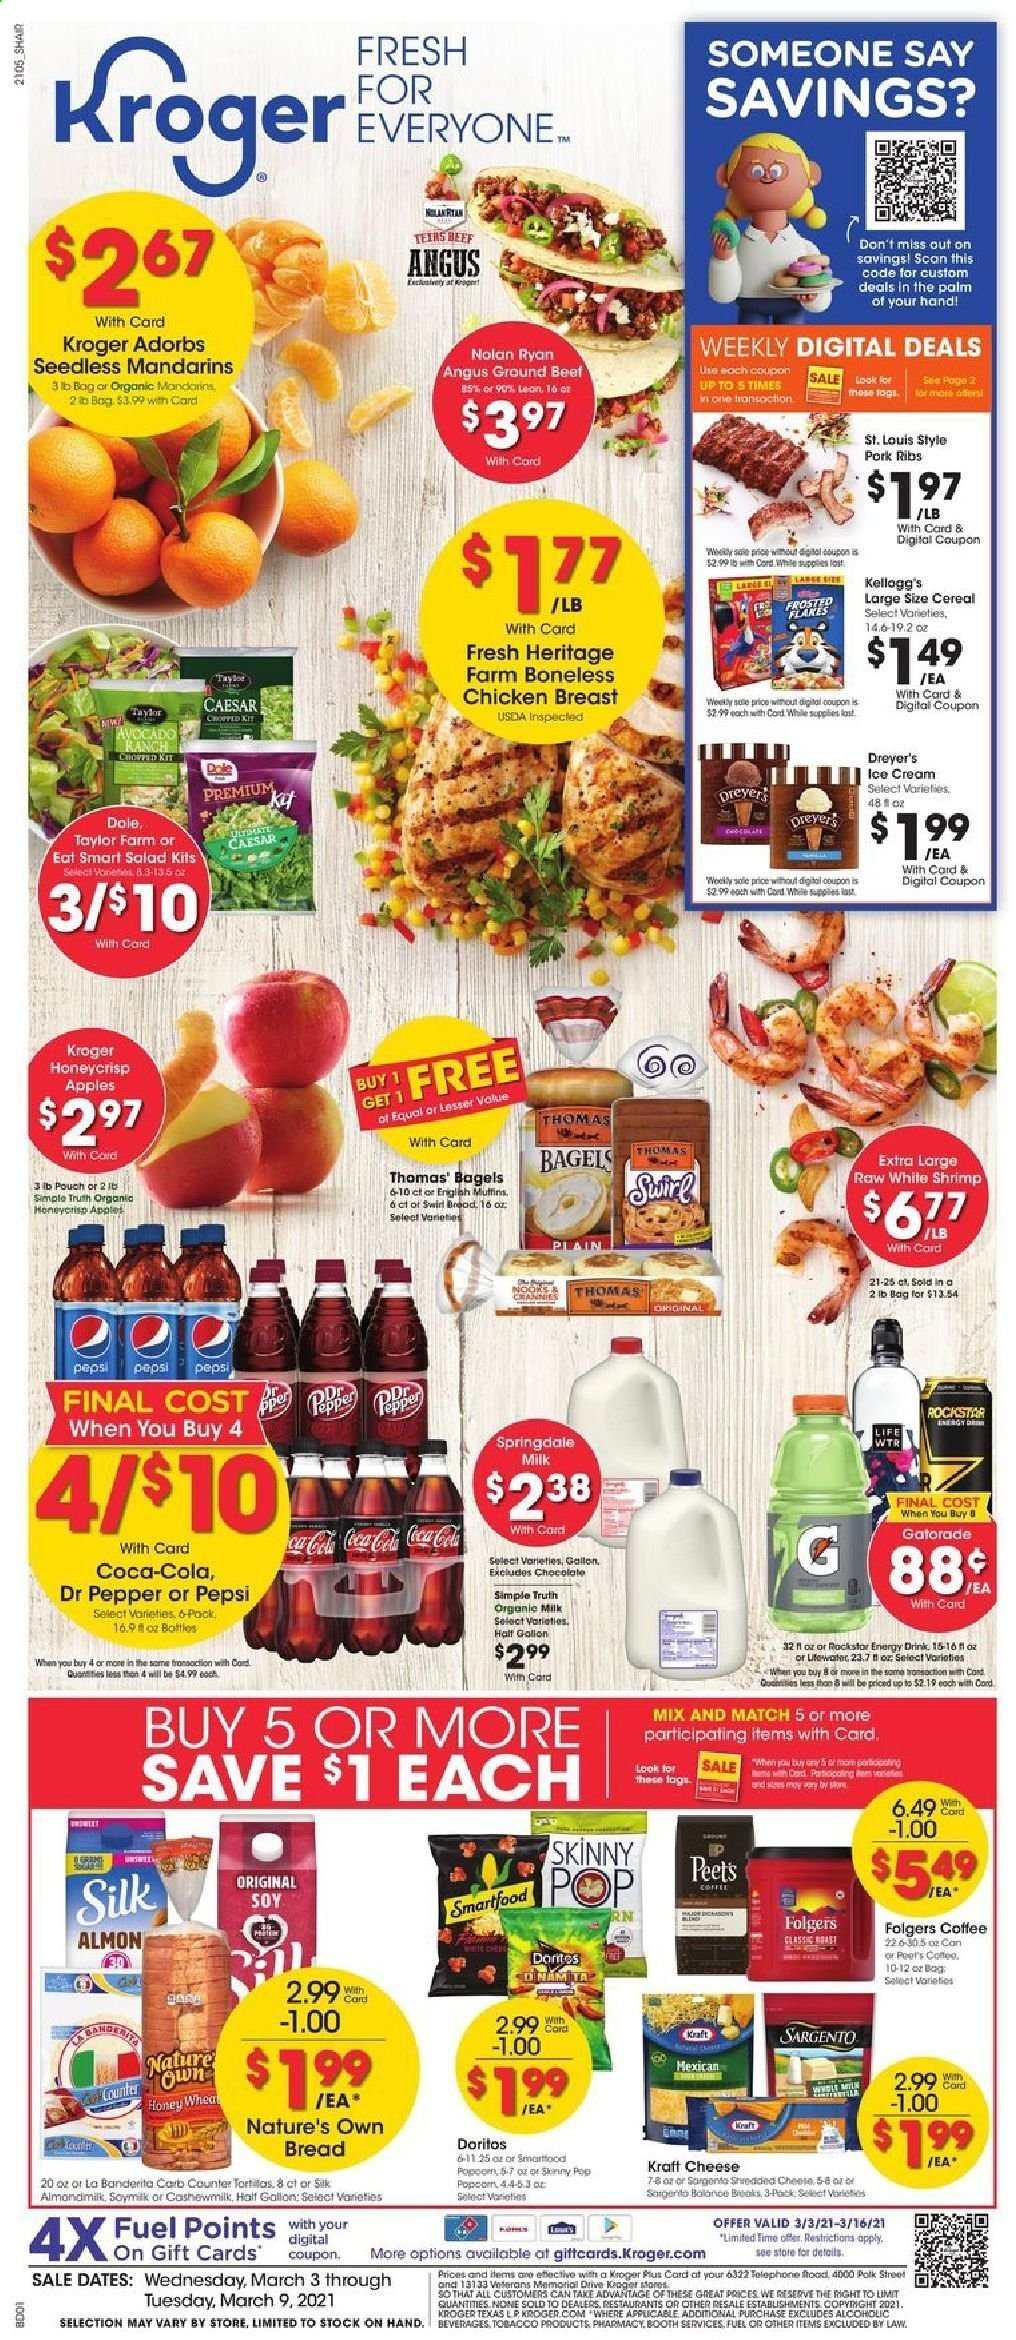 thumbnail - Kroger Flyer - 03/03/2021 - 03/09/2021 - Sales products - gallon, Dole, bread, tortillas, bagels, muffin, apples, shrimps, salad, Kraft®, cheese, Sargento, milk, soy milk, Silk, ice cream, Doritos, Smartfood, Skinny Pop, mandarines, cereals, Coca-Cola, Pepsi, energy drink, Dr. Pepper, Rockstar, Gatorade, coffee, Folgers, L'Or, chicken breasts, beef meat, ground beef, pork meat, pork ribs, Nature's Own. Page 1.